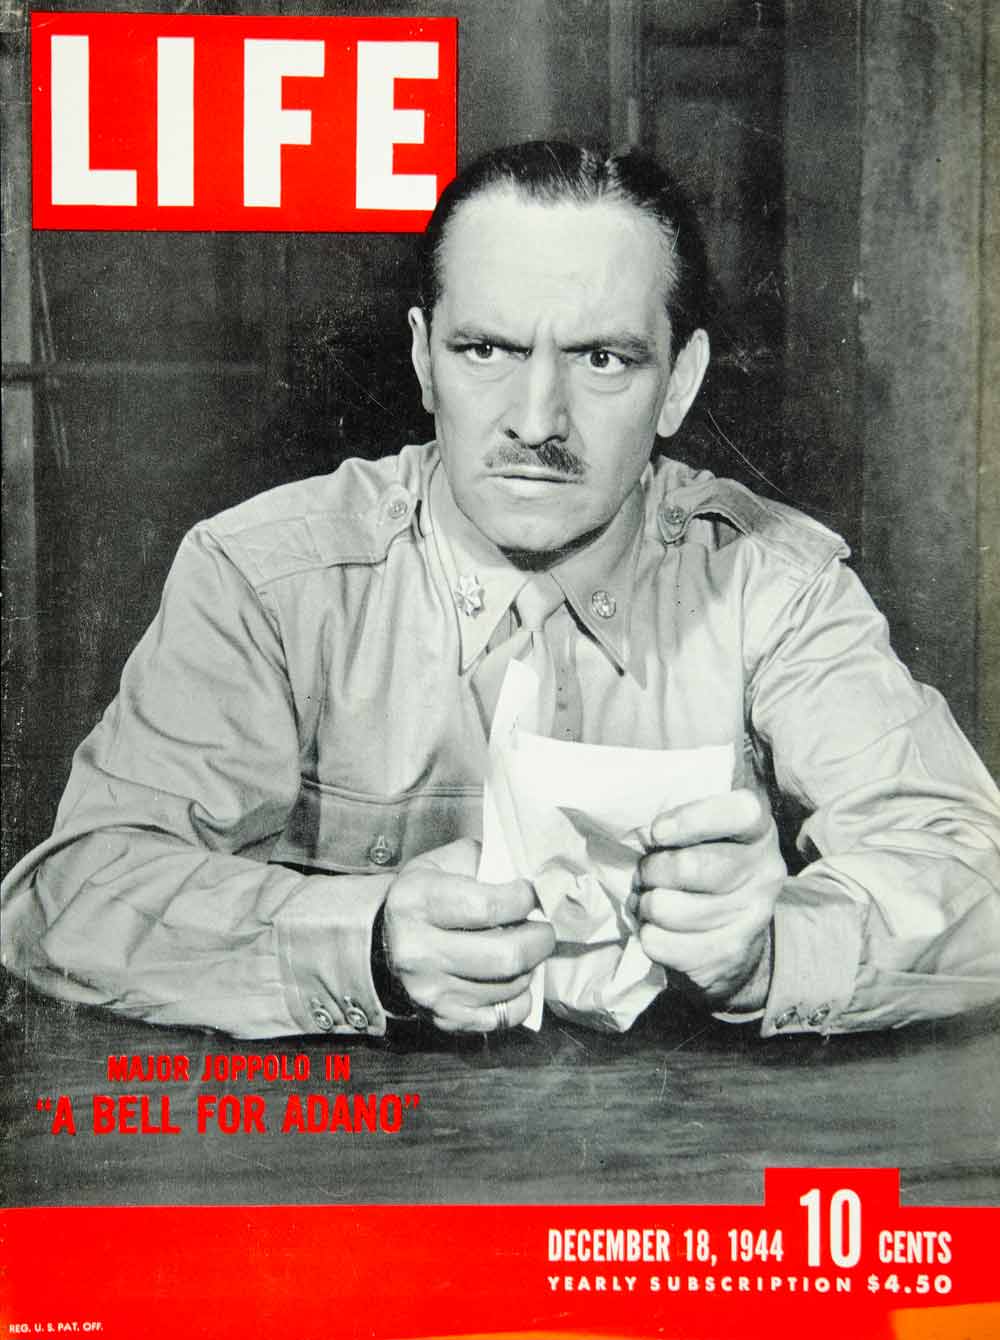 1944 Cover LIFE Fredric March Bell for Adano Play Major Joppolo Eileen YLMC1